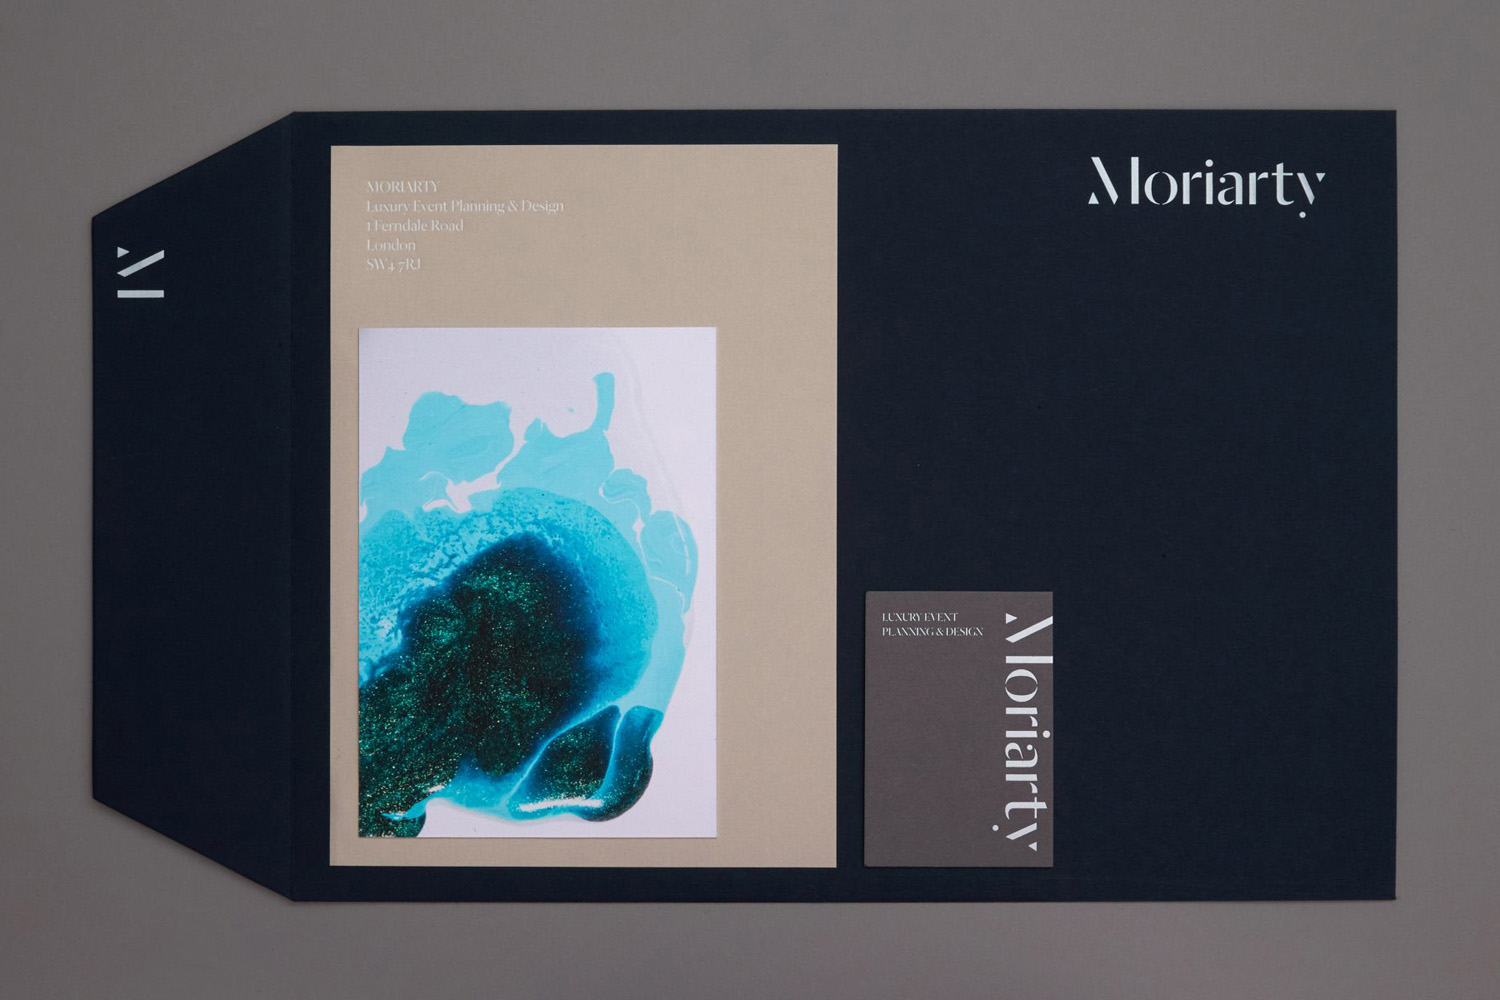 Designed by Bond – Moriarty